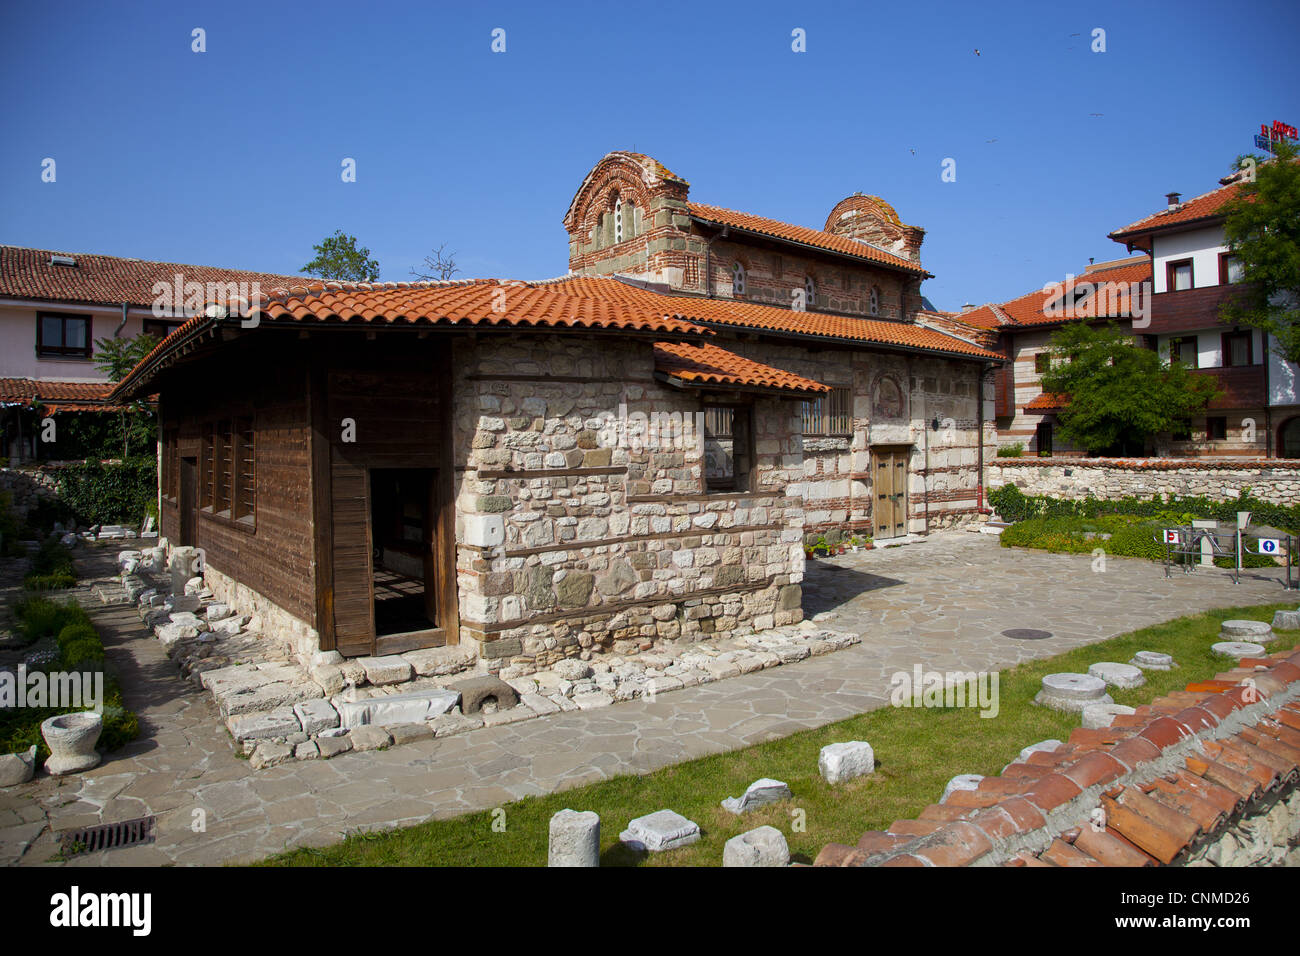 Medieval stone and wooden Church of St. Stephen, Nessebar, Bulgaria, Europe Stock Photo